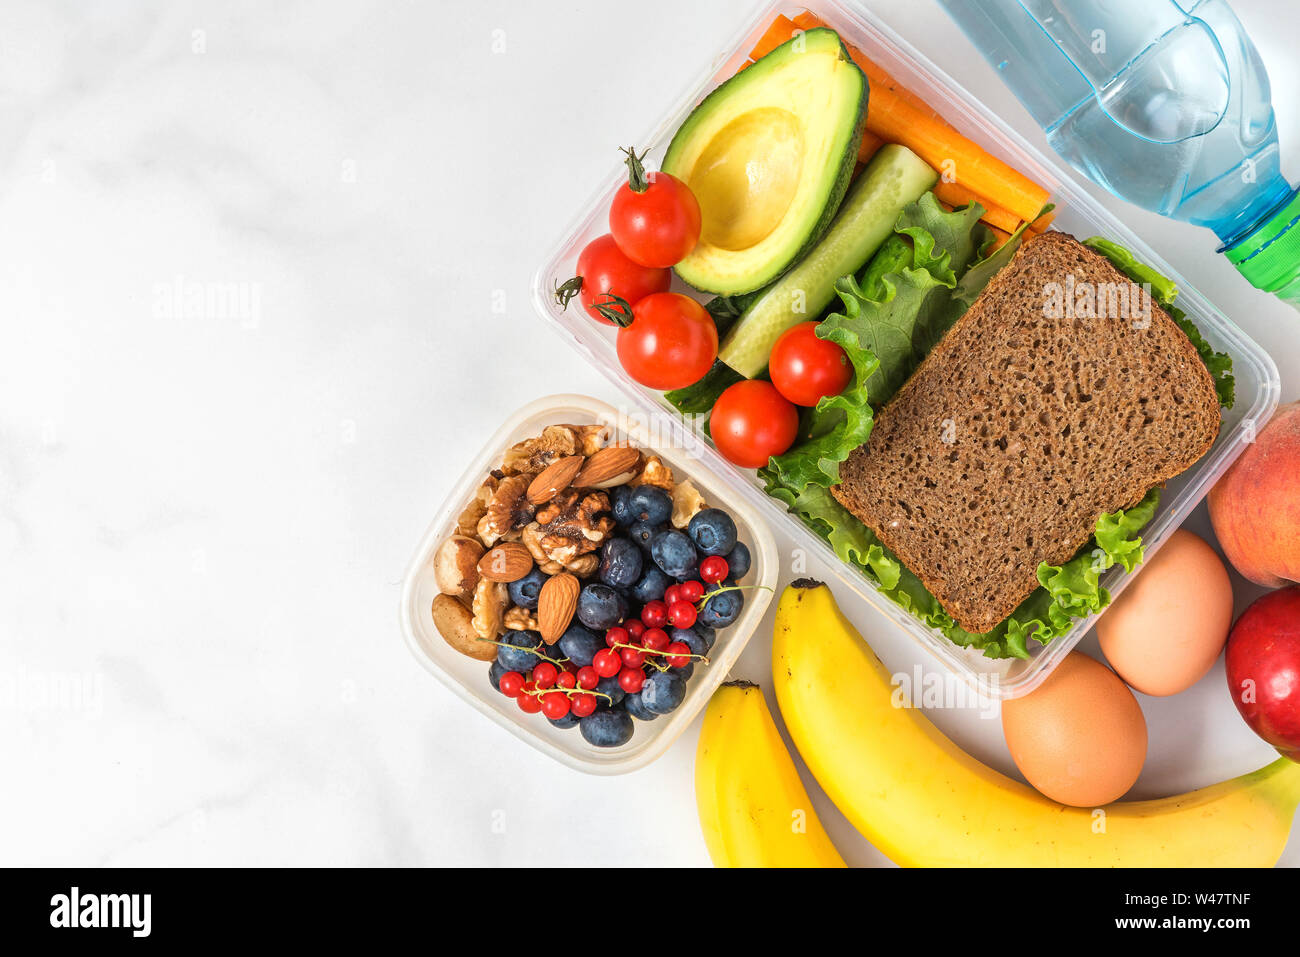 Lunch boxes with food ready to go for work or school. sandwich, vegetables, avocado, nuts, berries, eggs and water. meal preparation or dieting concep Stock Photo